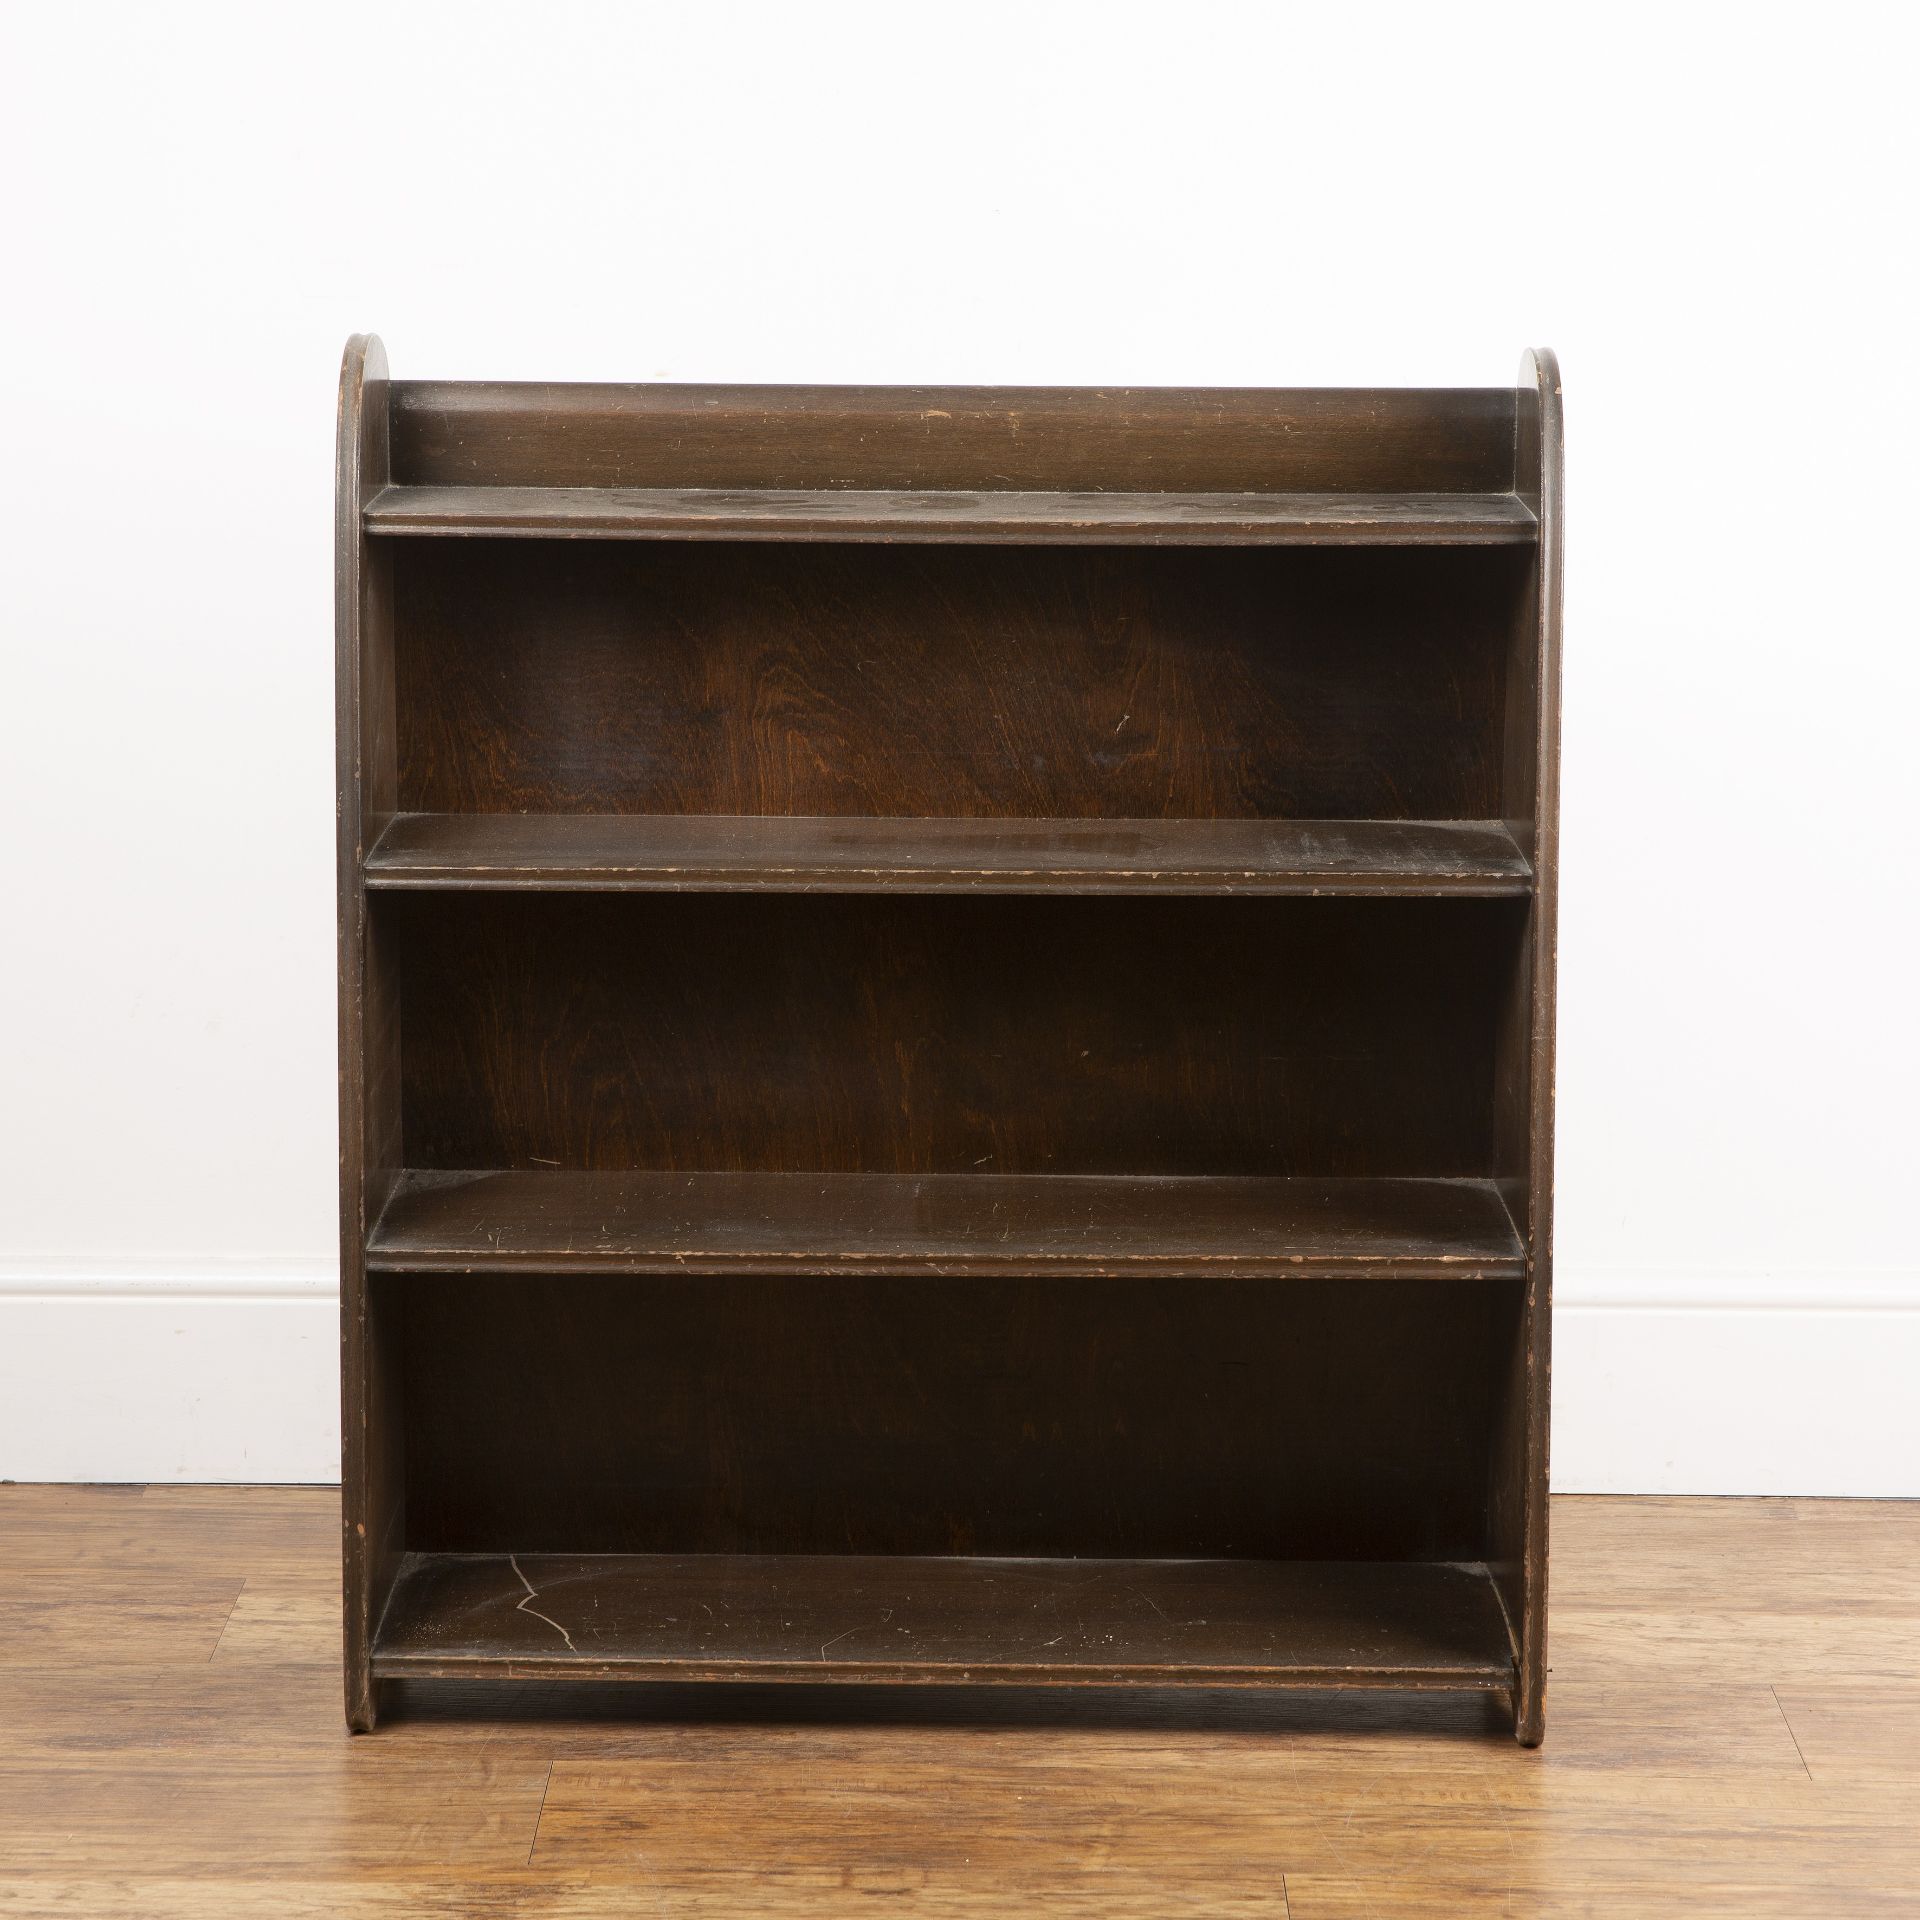 Remploy Furniture stained wood, open bookcase with rounded top, four fixed shelves, label to the